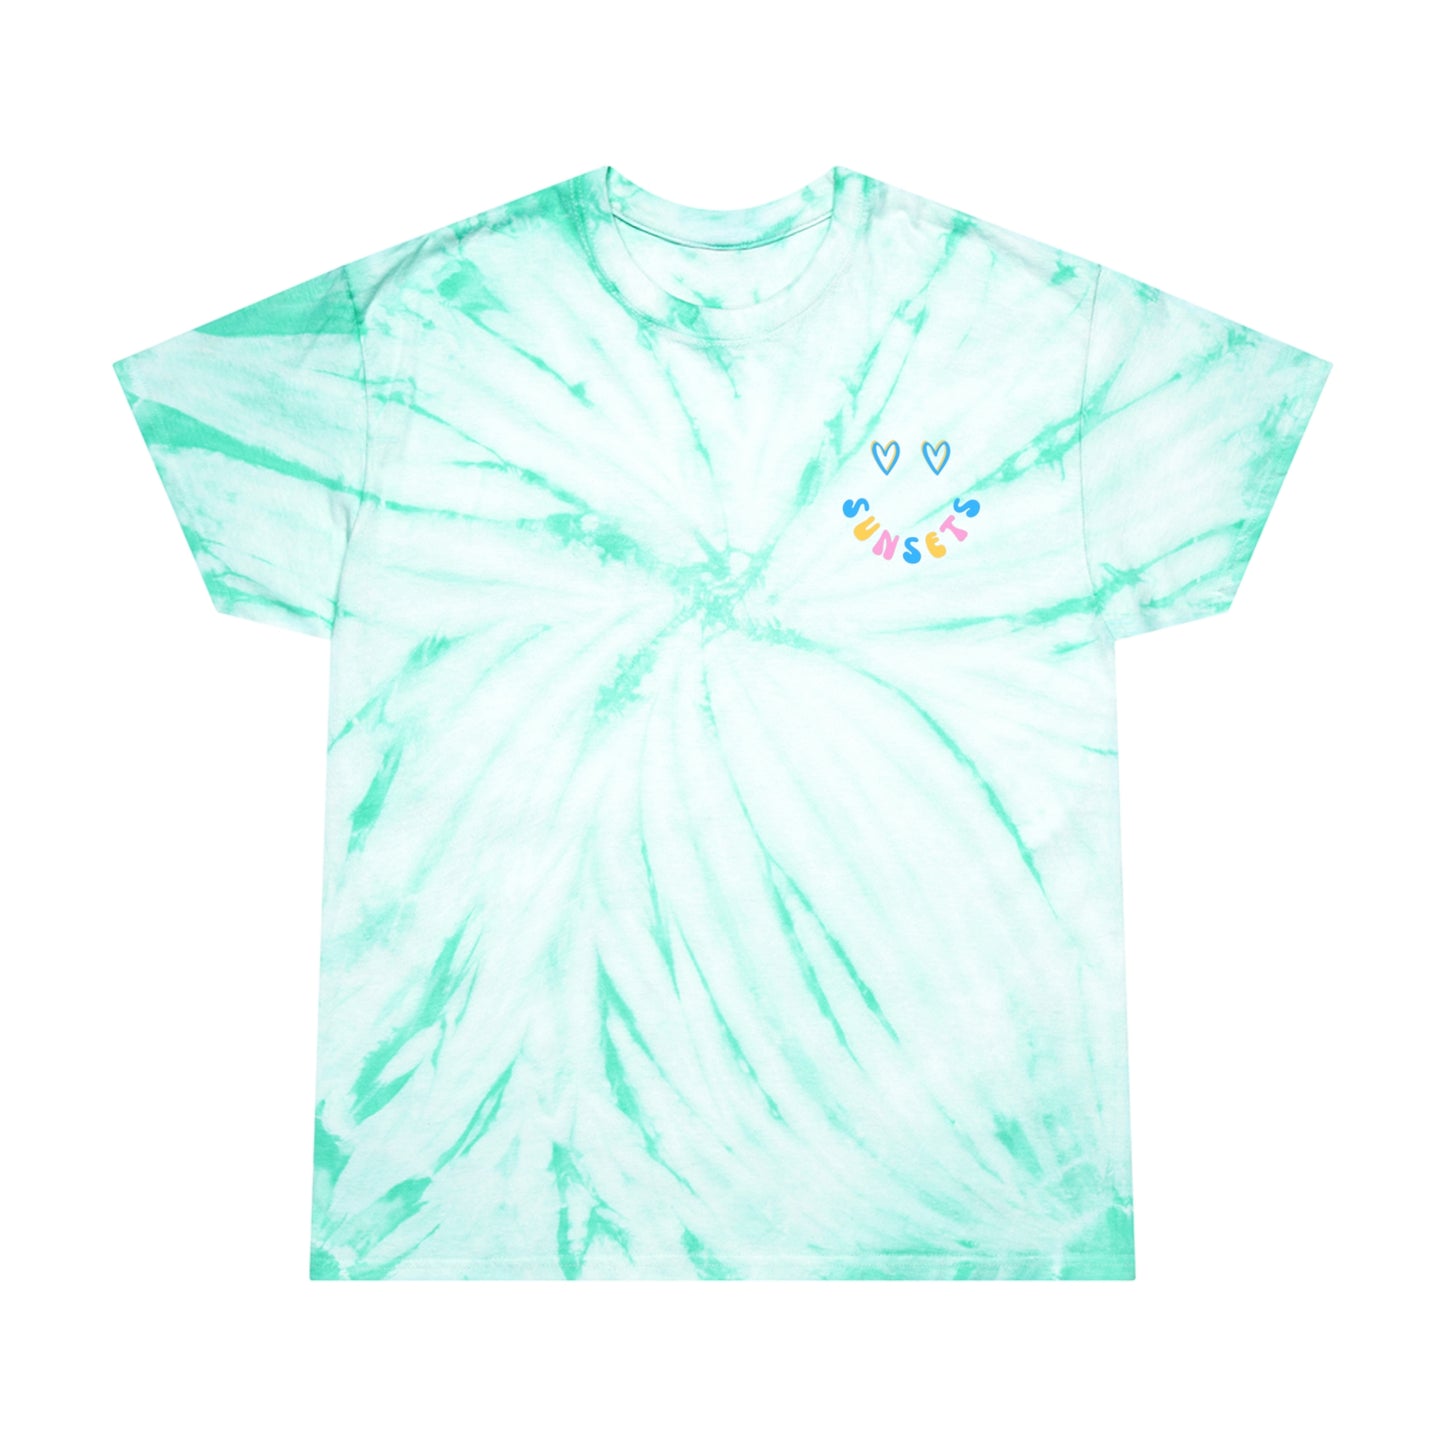 Sunsets Graphic Letter Design Unisex Tie-Dye Tee